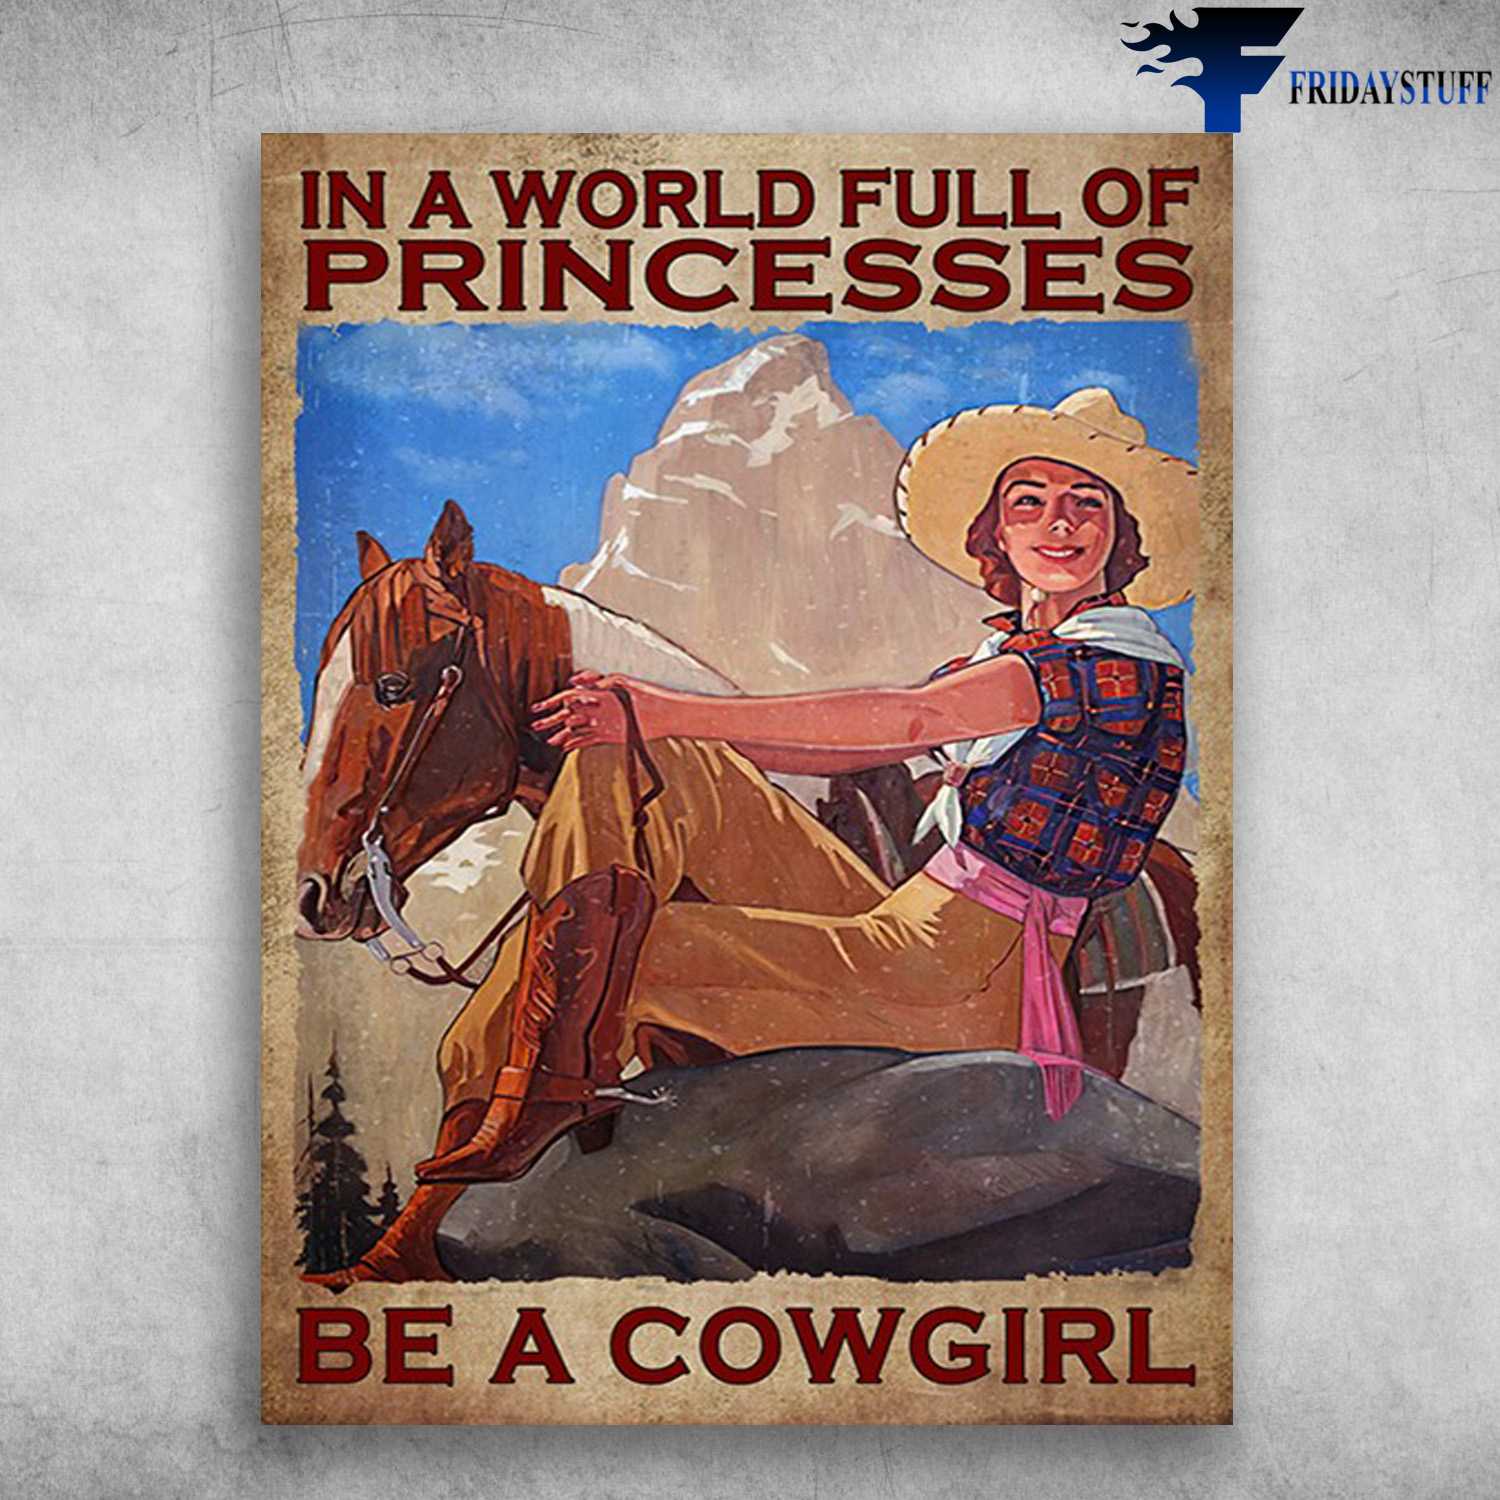 Horse Riding, Girl And Horse - In A World Full Of Princesses, Be A Cowgirl